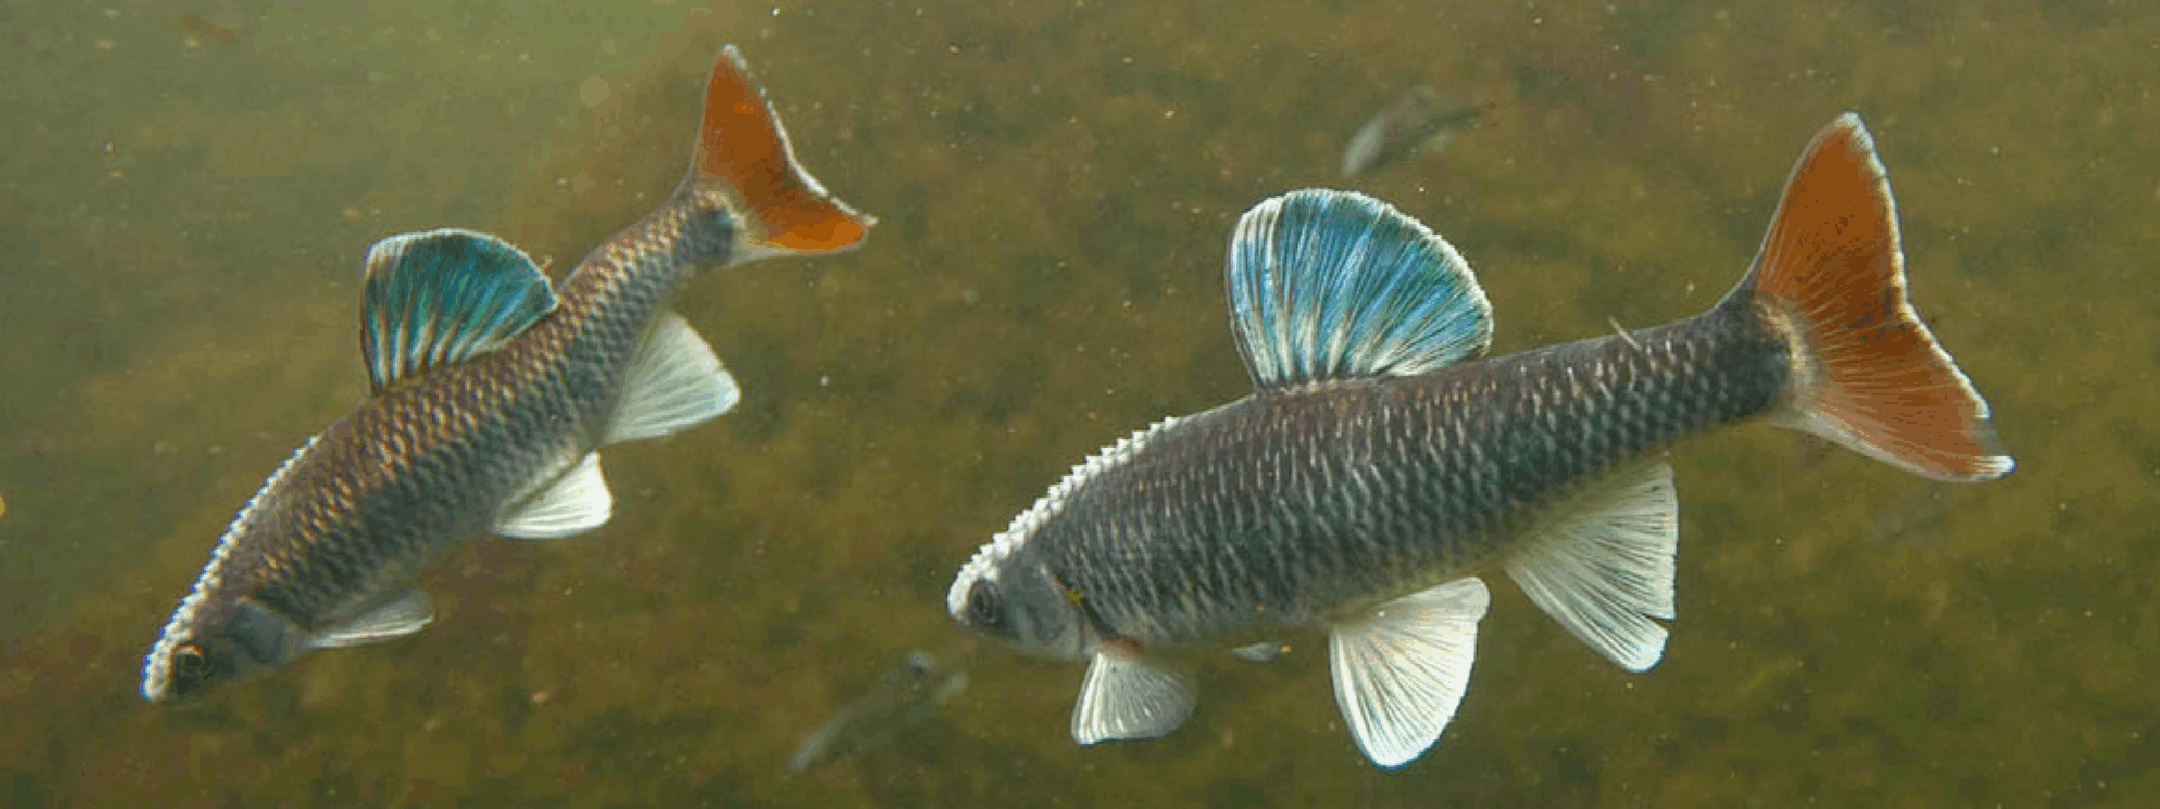 two small fish with blue and orange fins 